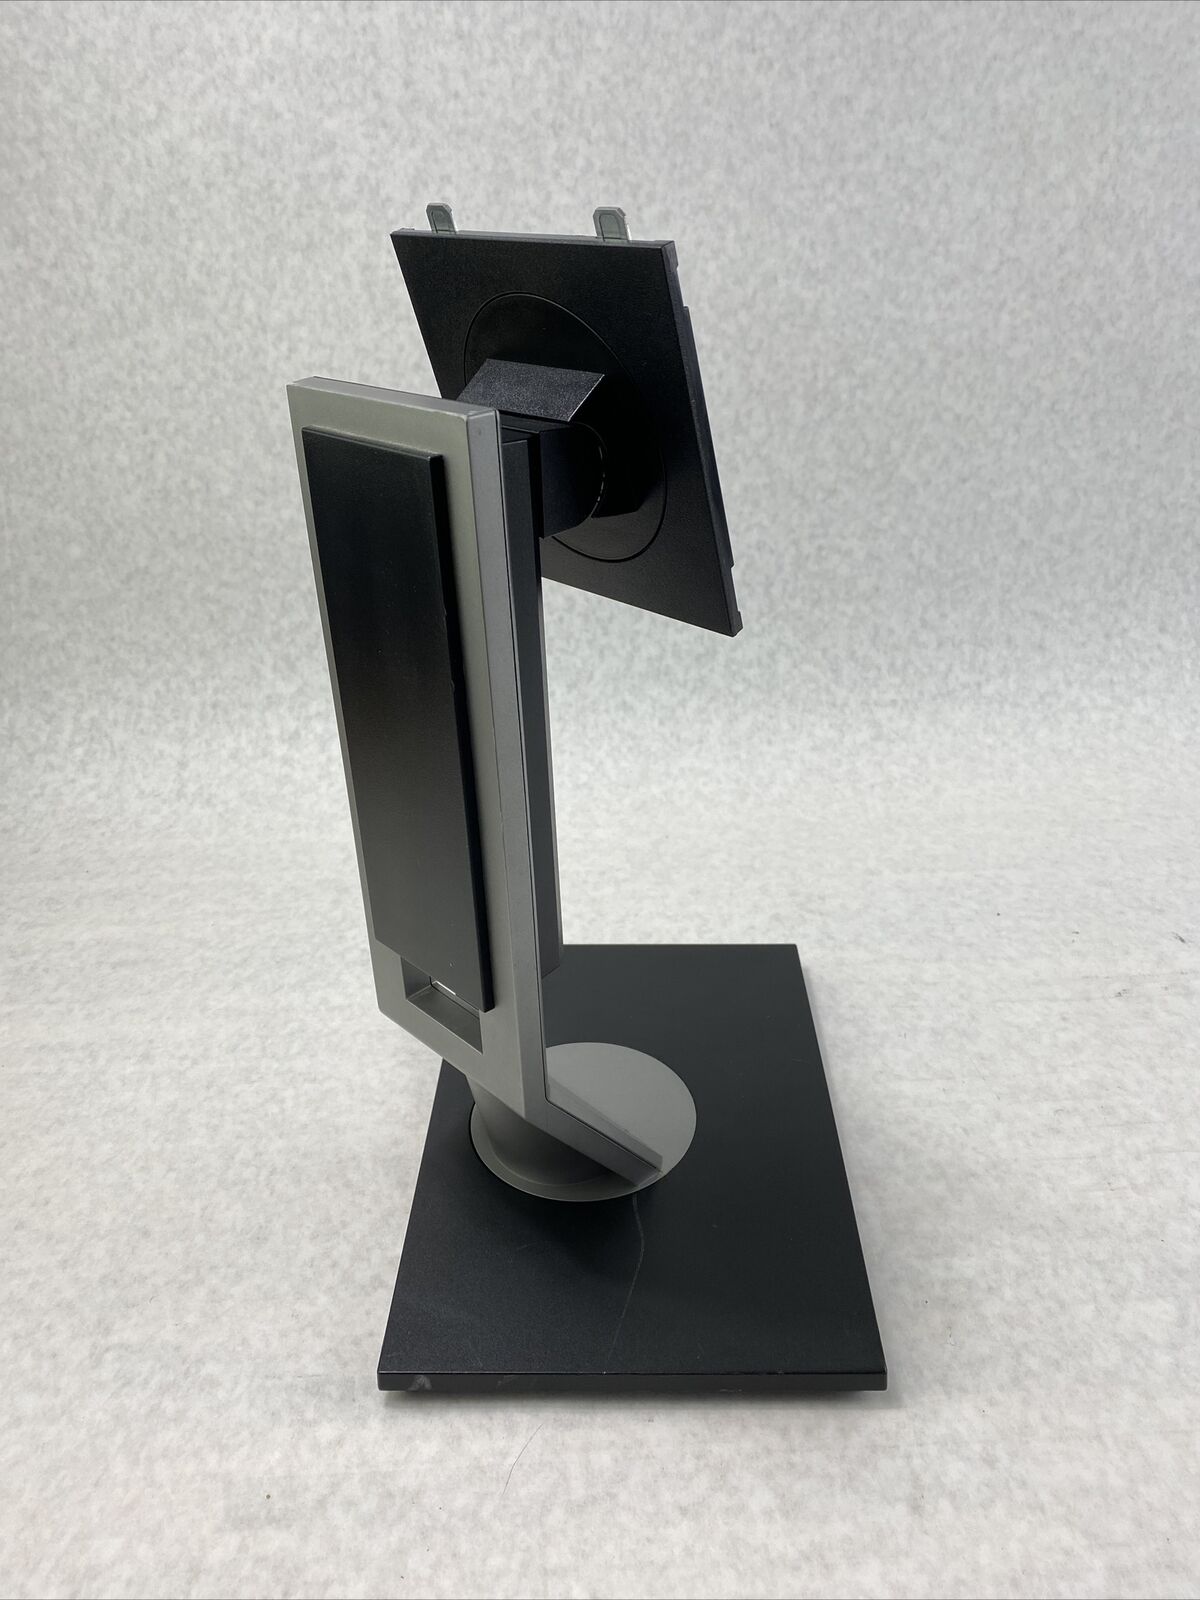 Dell P1911t 45 degree swiveling monitor stand